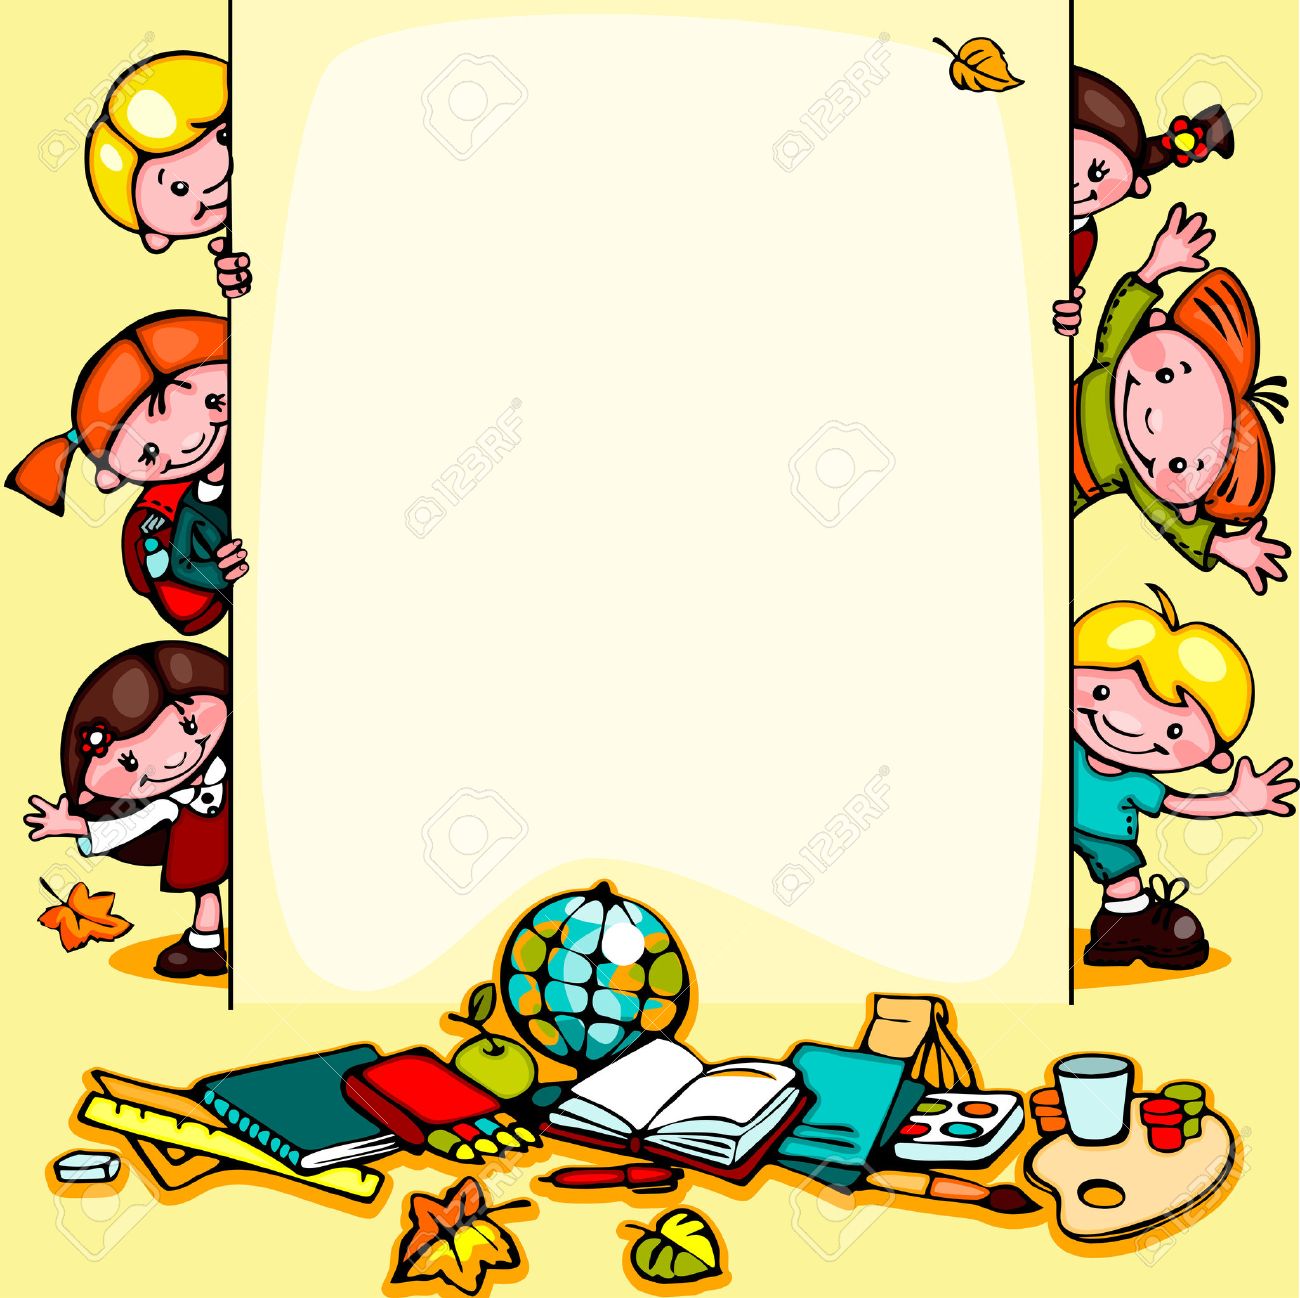 Clipart school background 4 » Clipart Station.